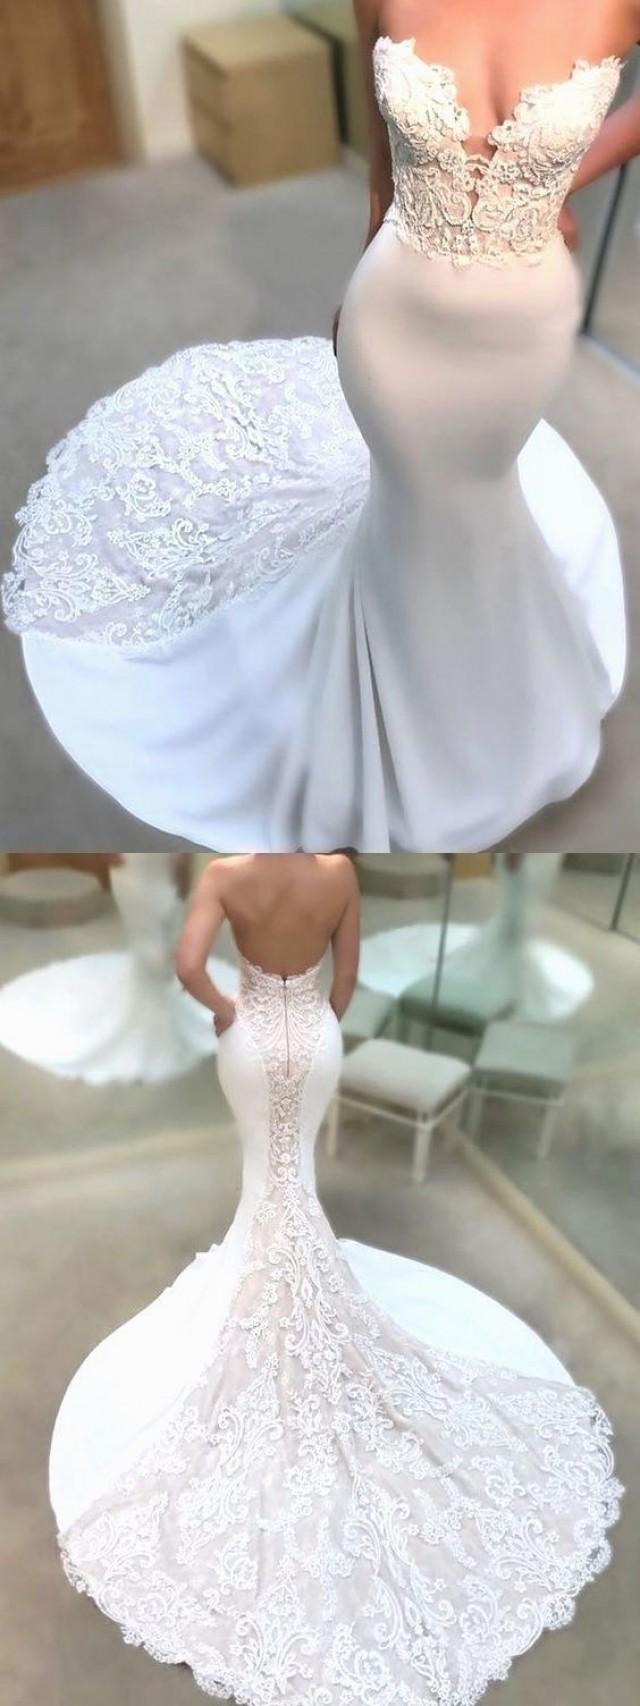 Mermaid Wedding Dress Lace Wedding Gowns Sexy Wedding Dresses With Lace Appliques